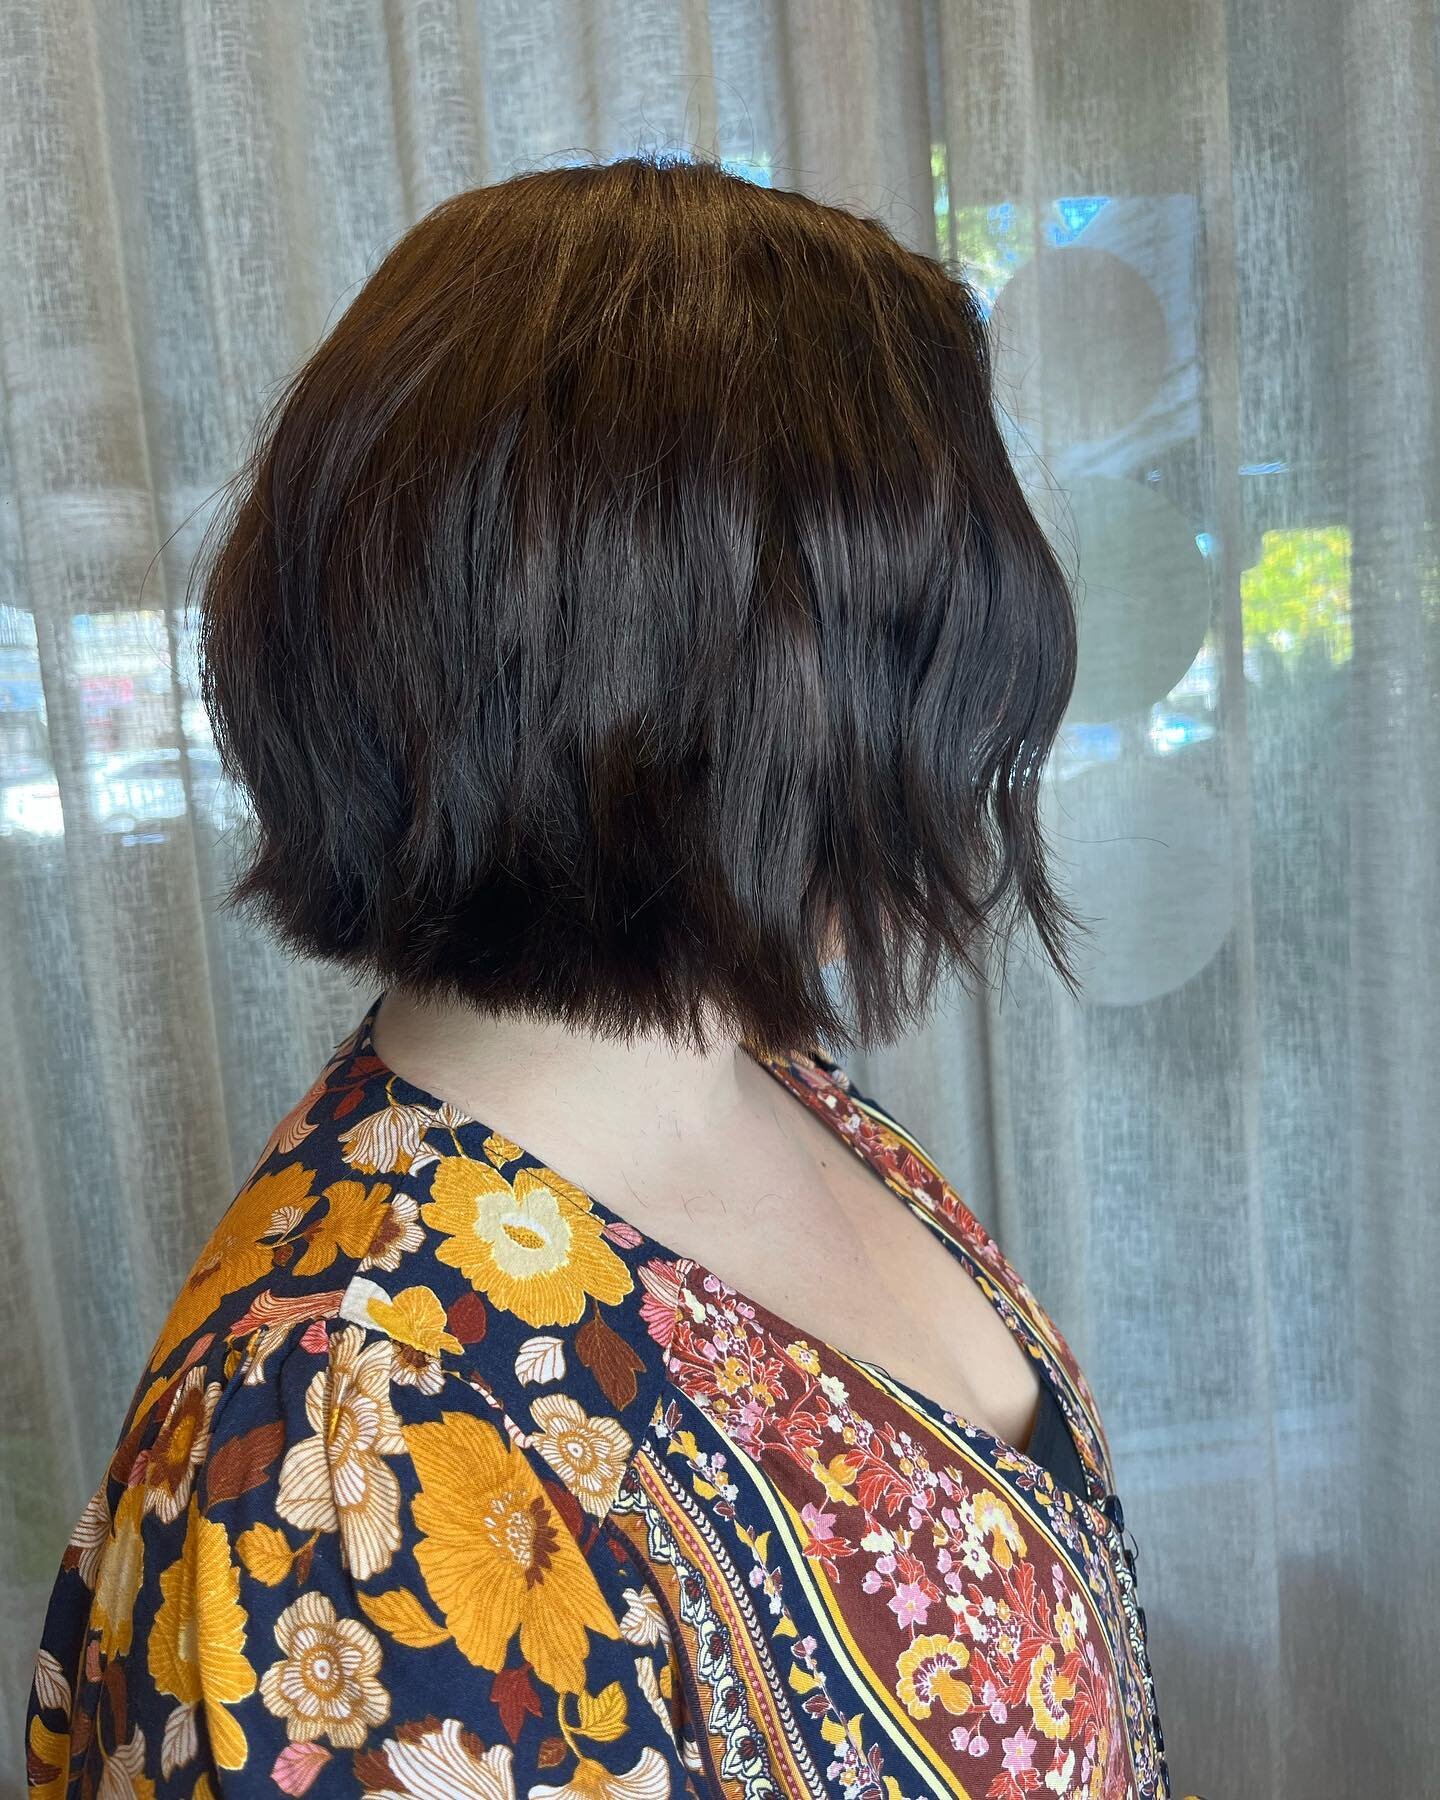 Such a huge amazing chop today by Sandra! Nothing better than a huge transition from long to short.